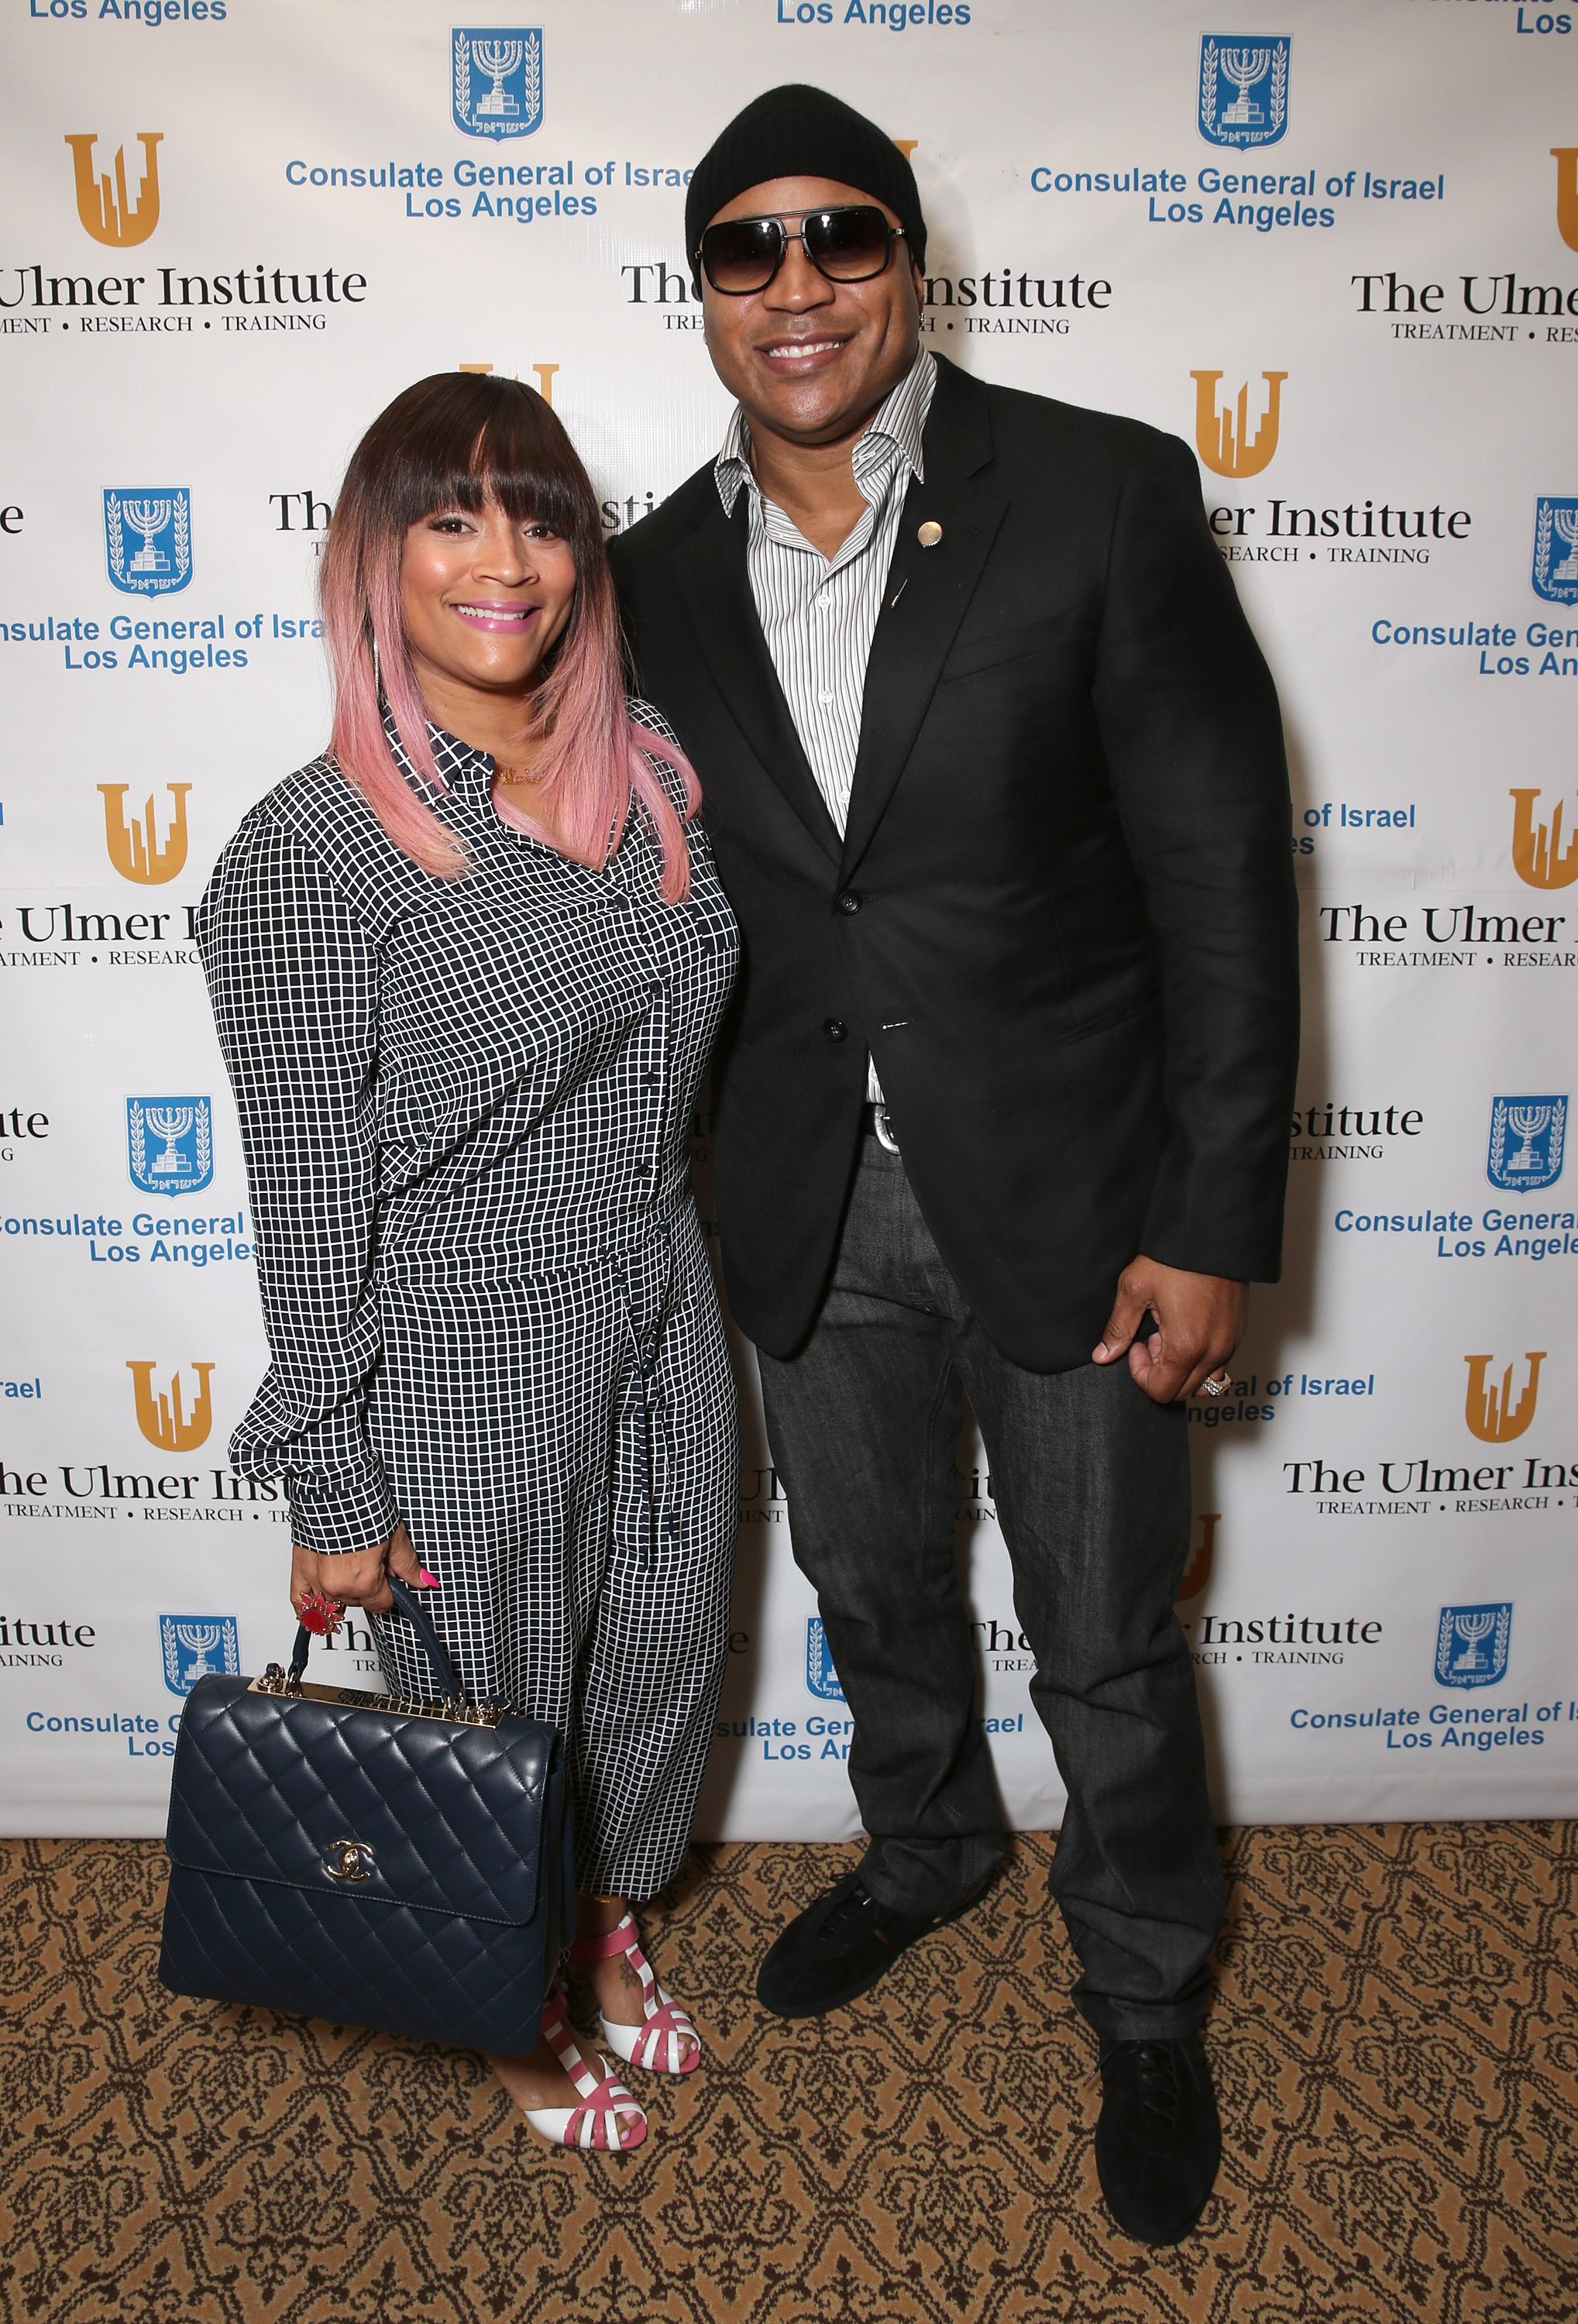 Simone Smith and LL Cool J at the Ulmer Institute launch celebration in Beverly Hills, California, 2016. | Photo Getty Images